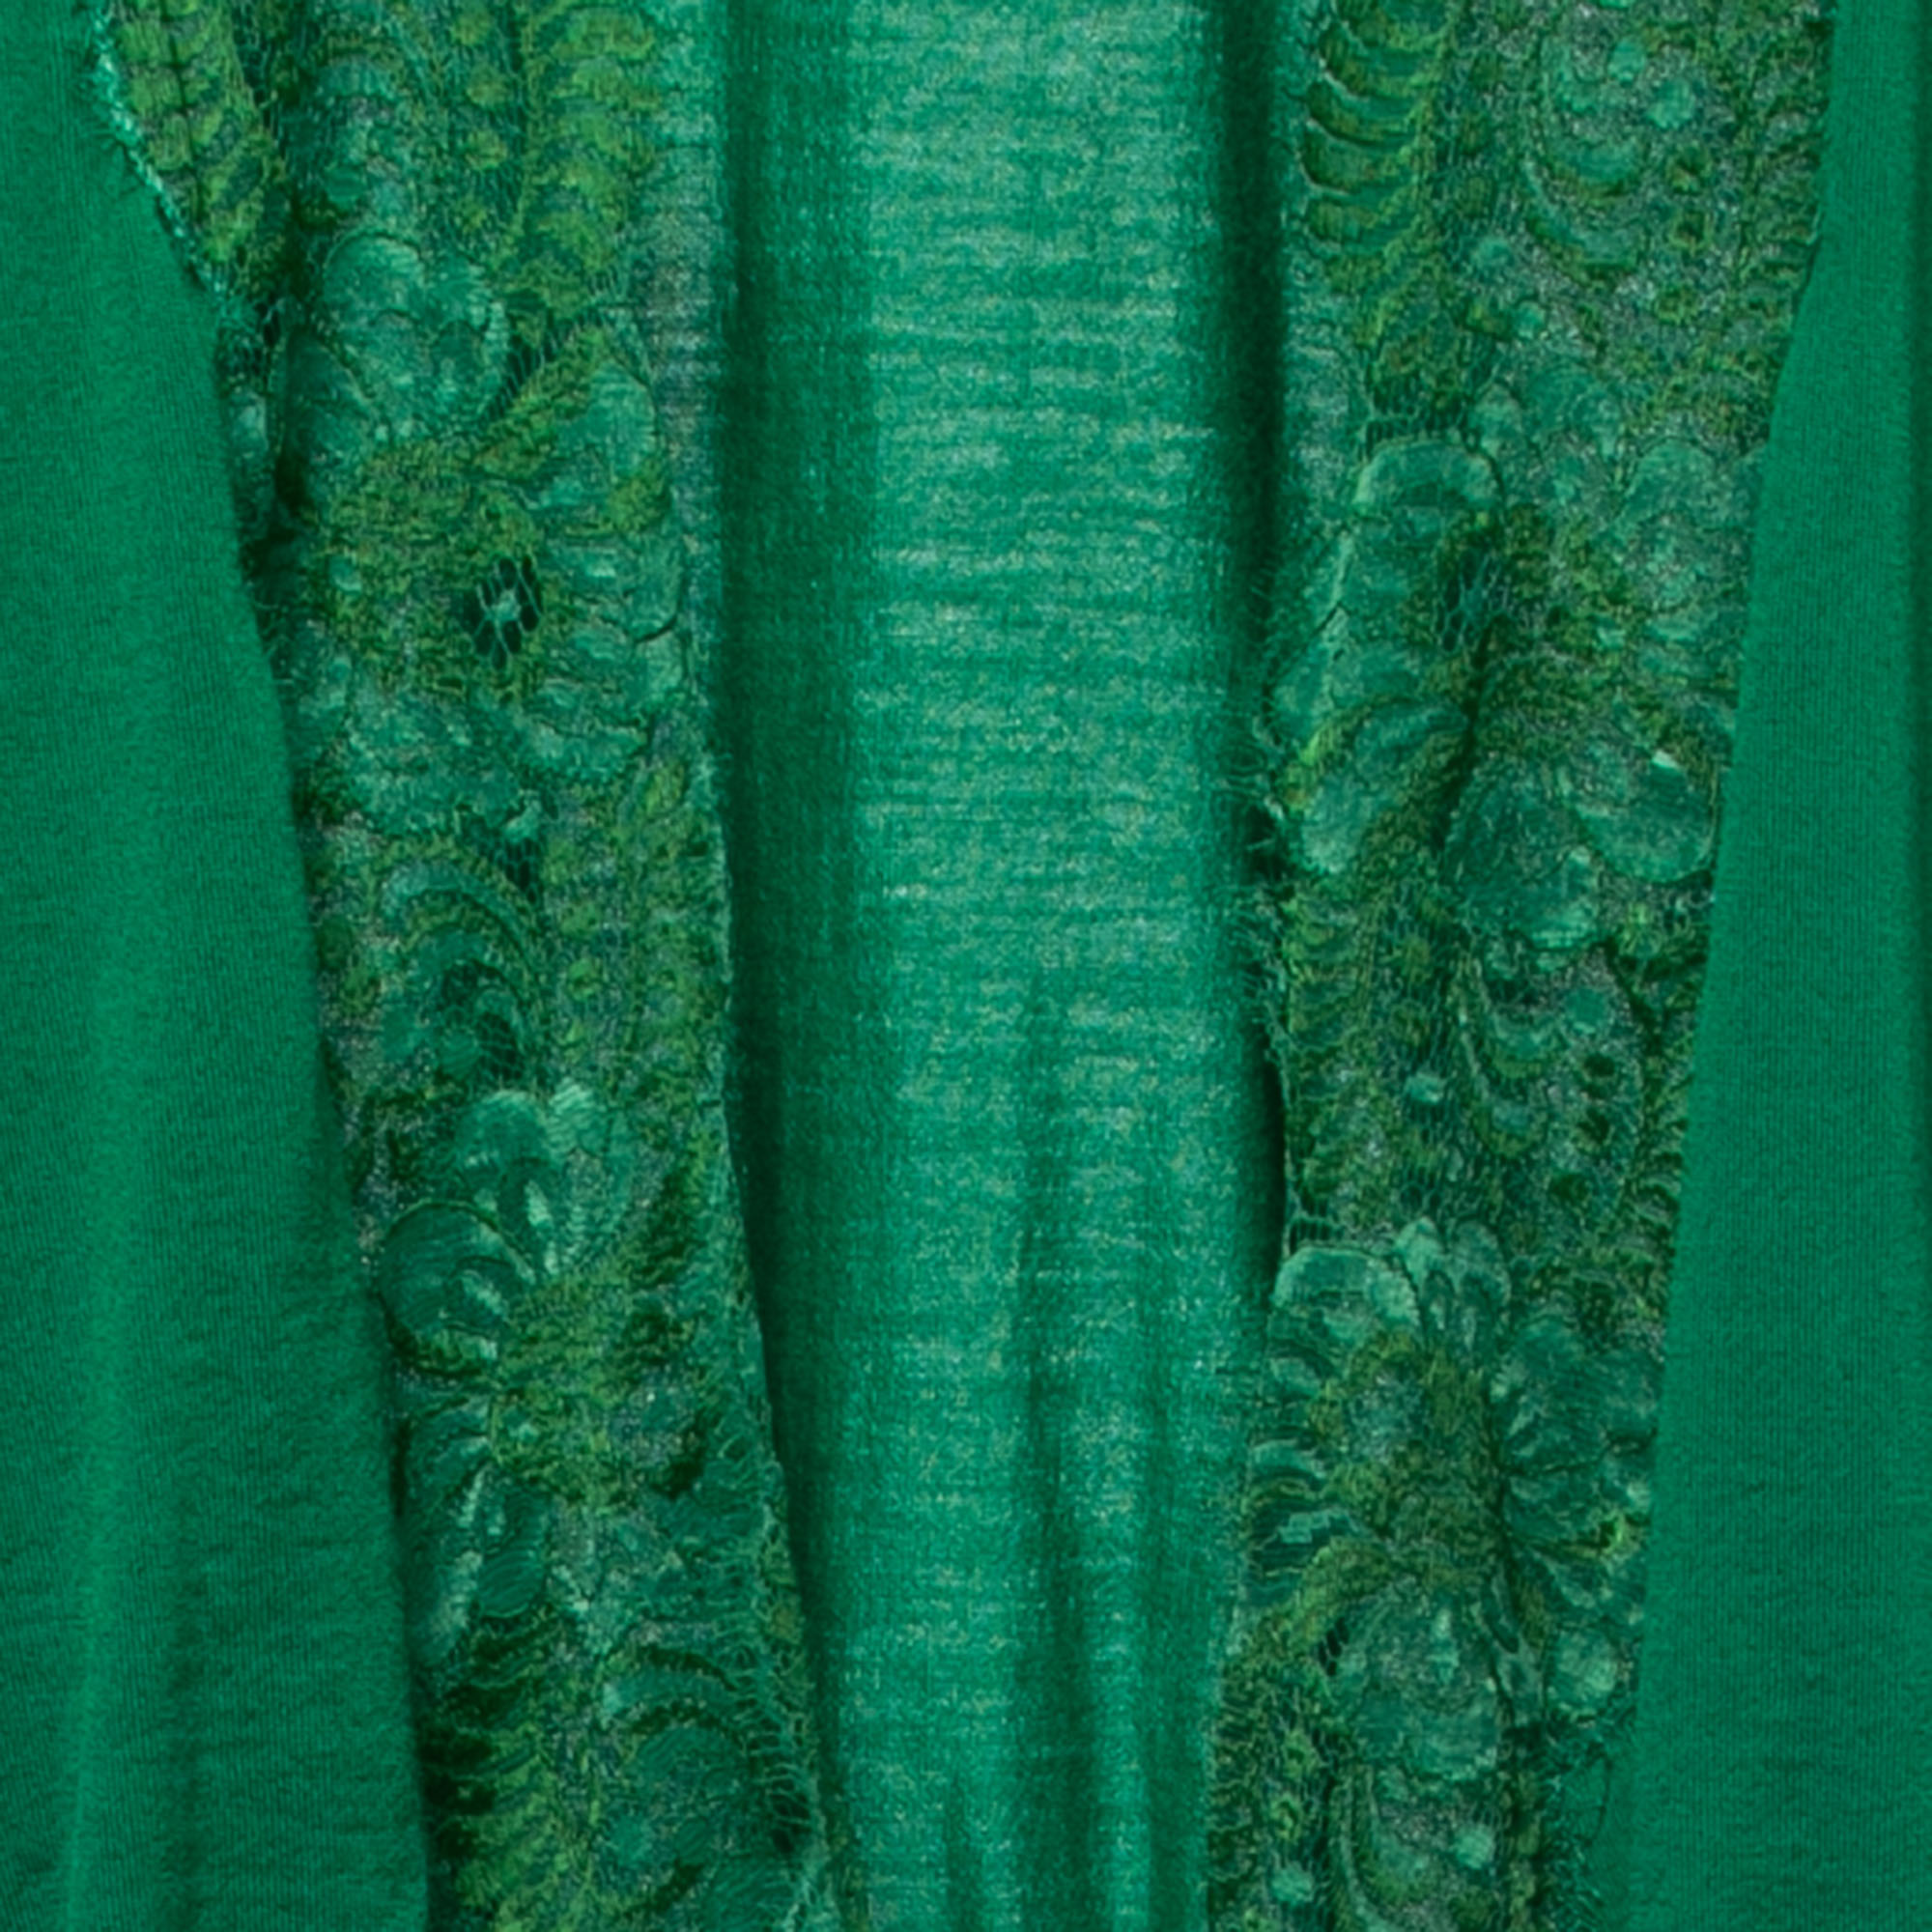 Dolce & Gabbana Green Wool & Lace Trimmed Sleeveless Wrap Top L